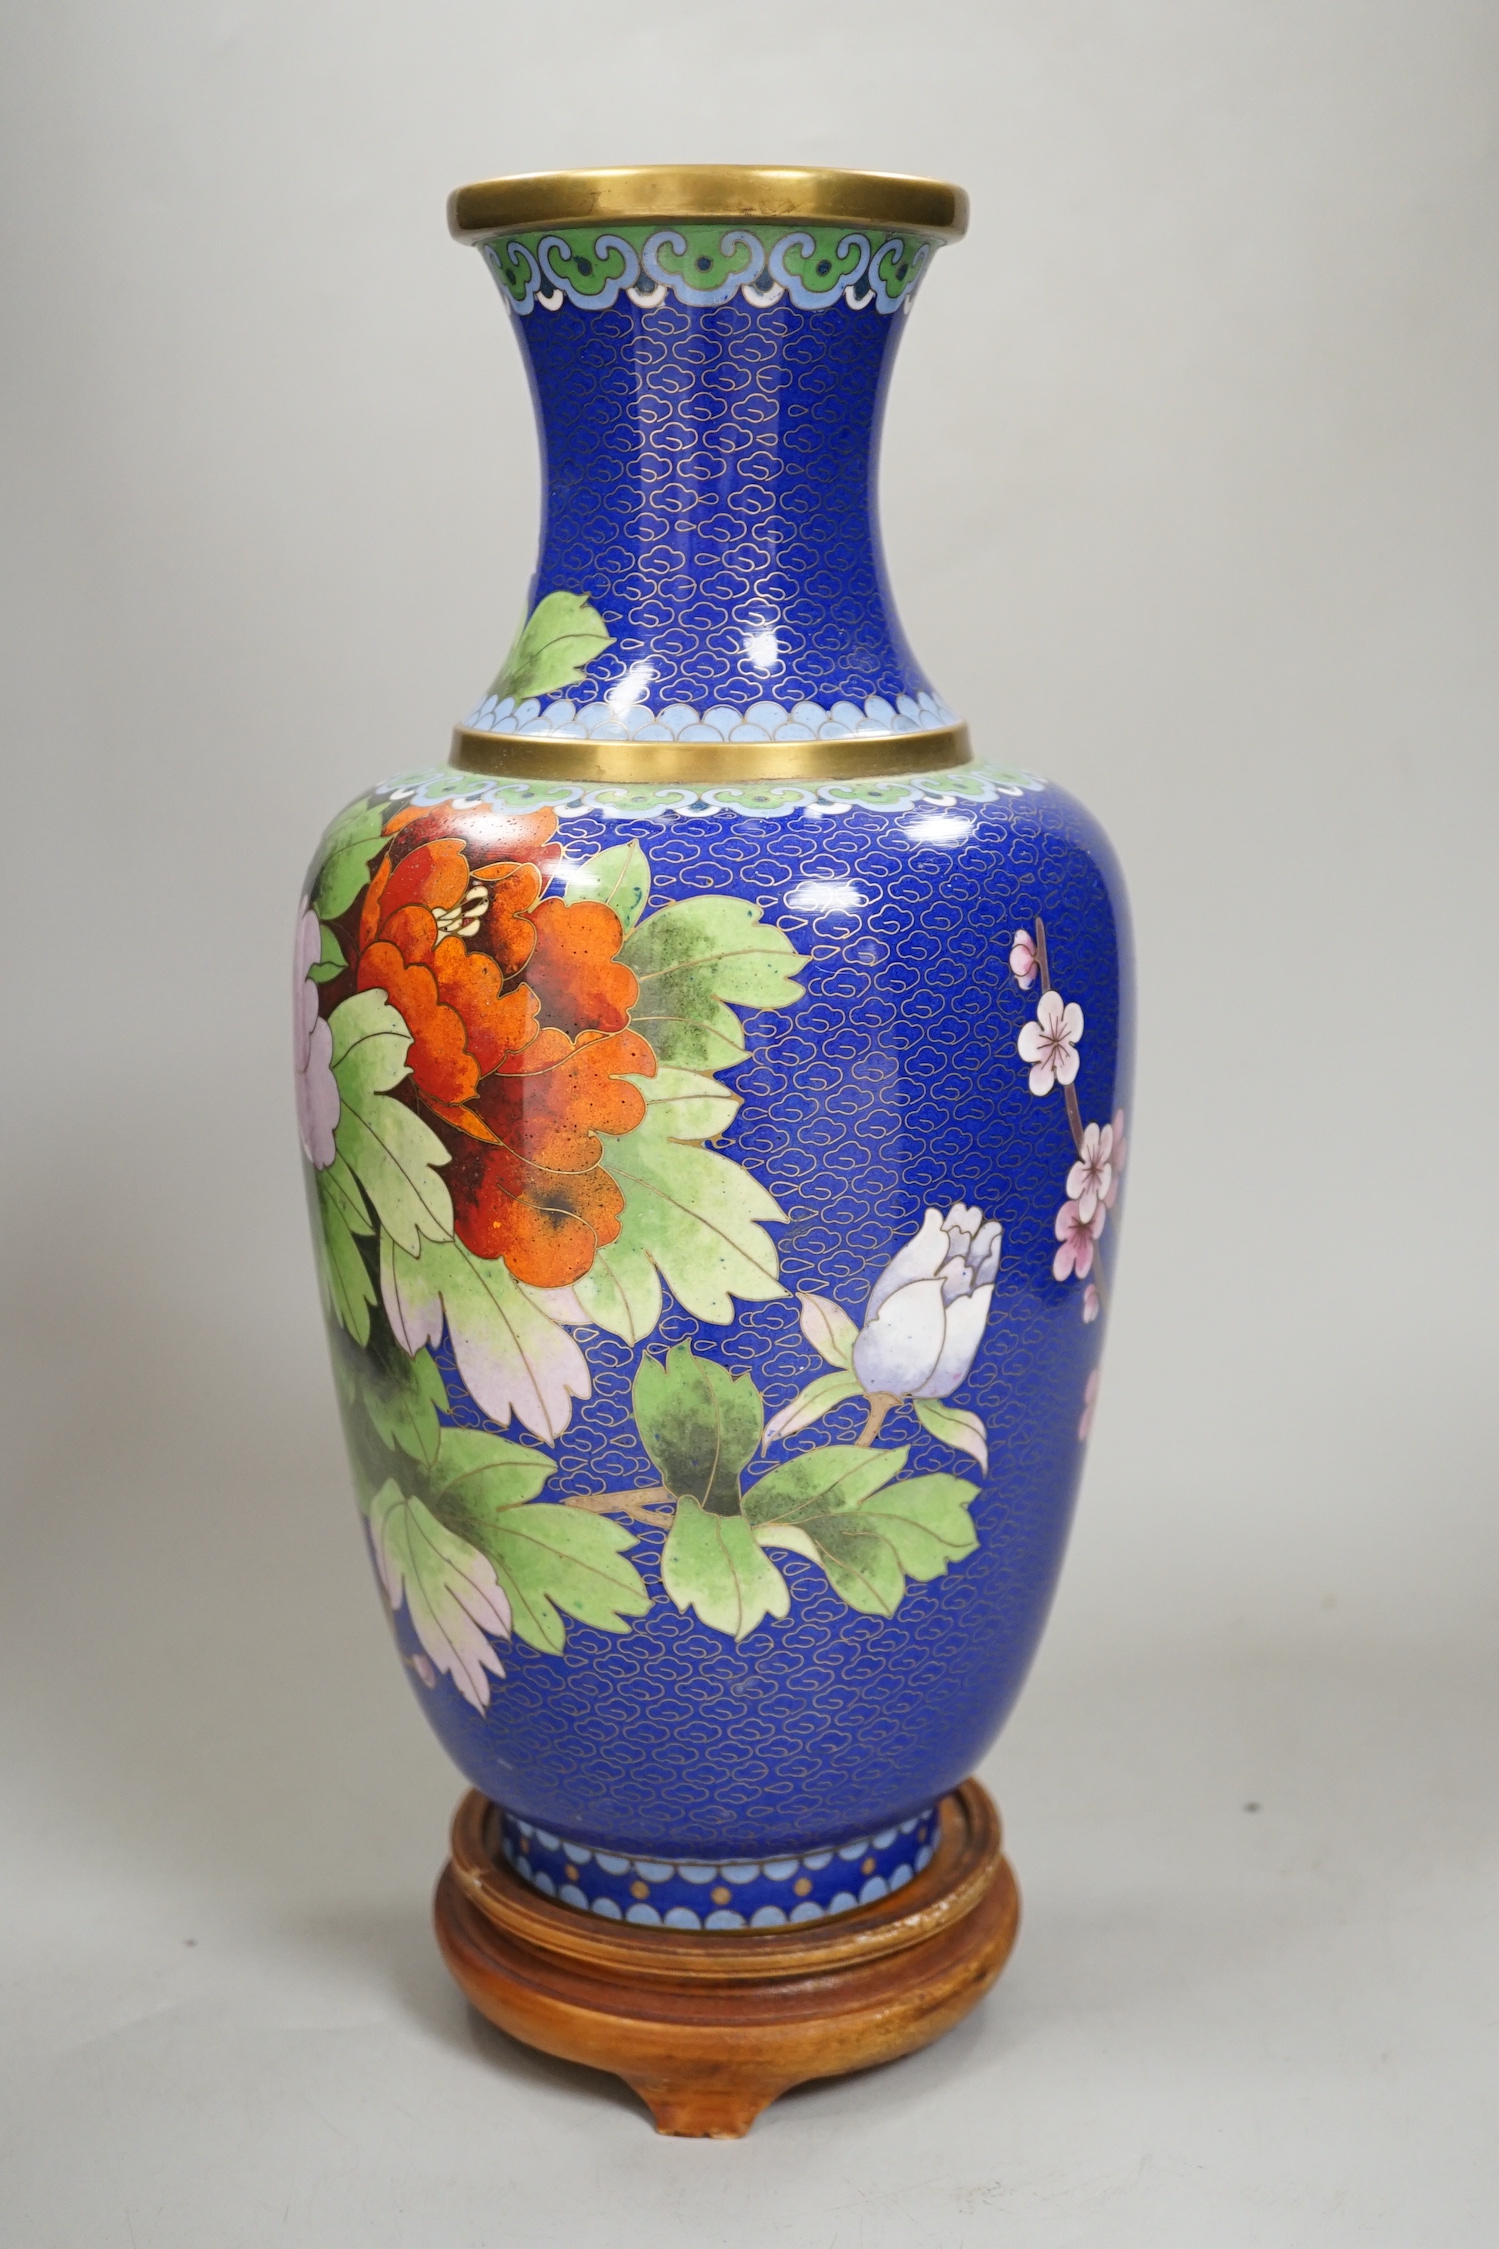 A Chinese cloisonné enamel vase on stand, 35cm high including stand